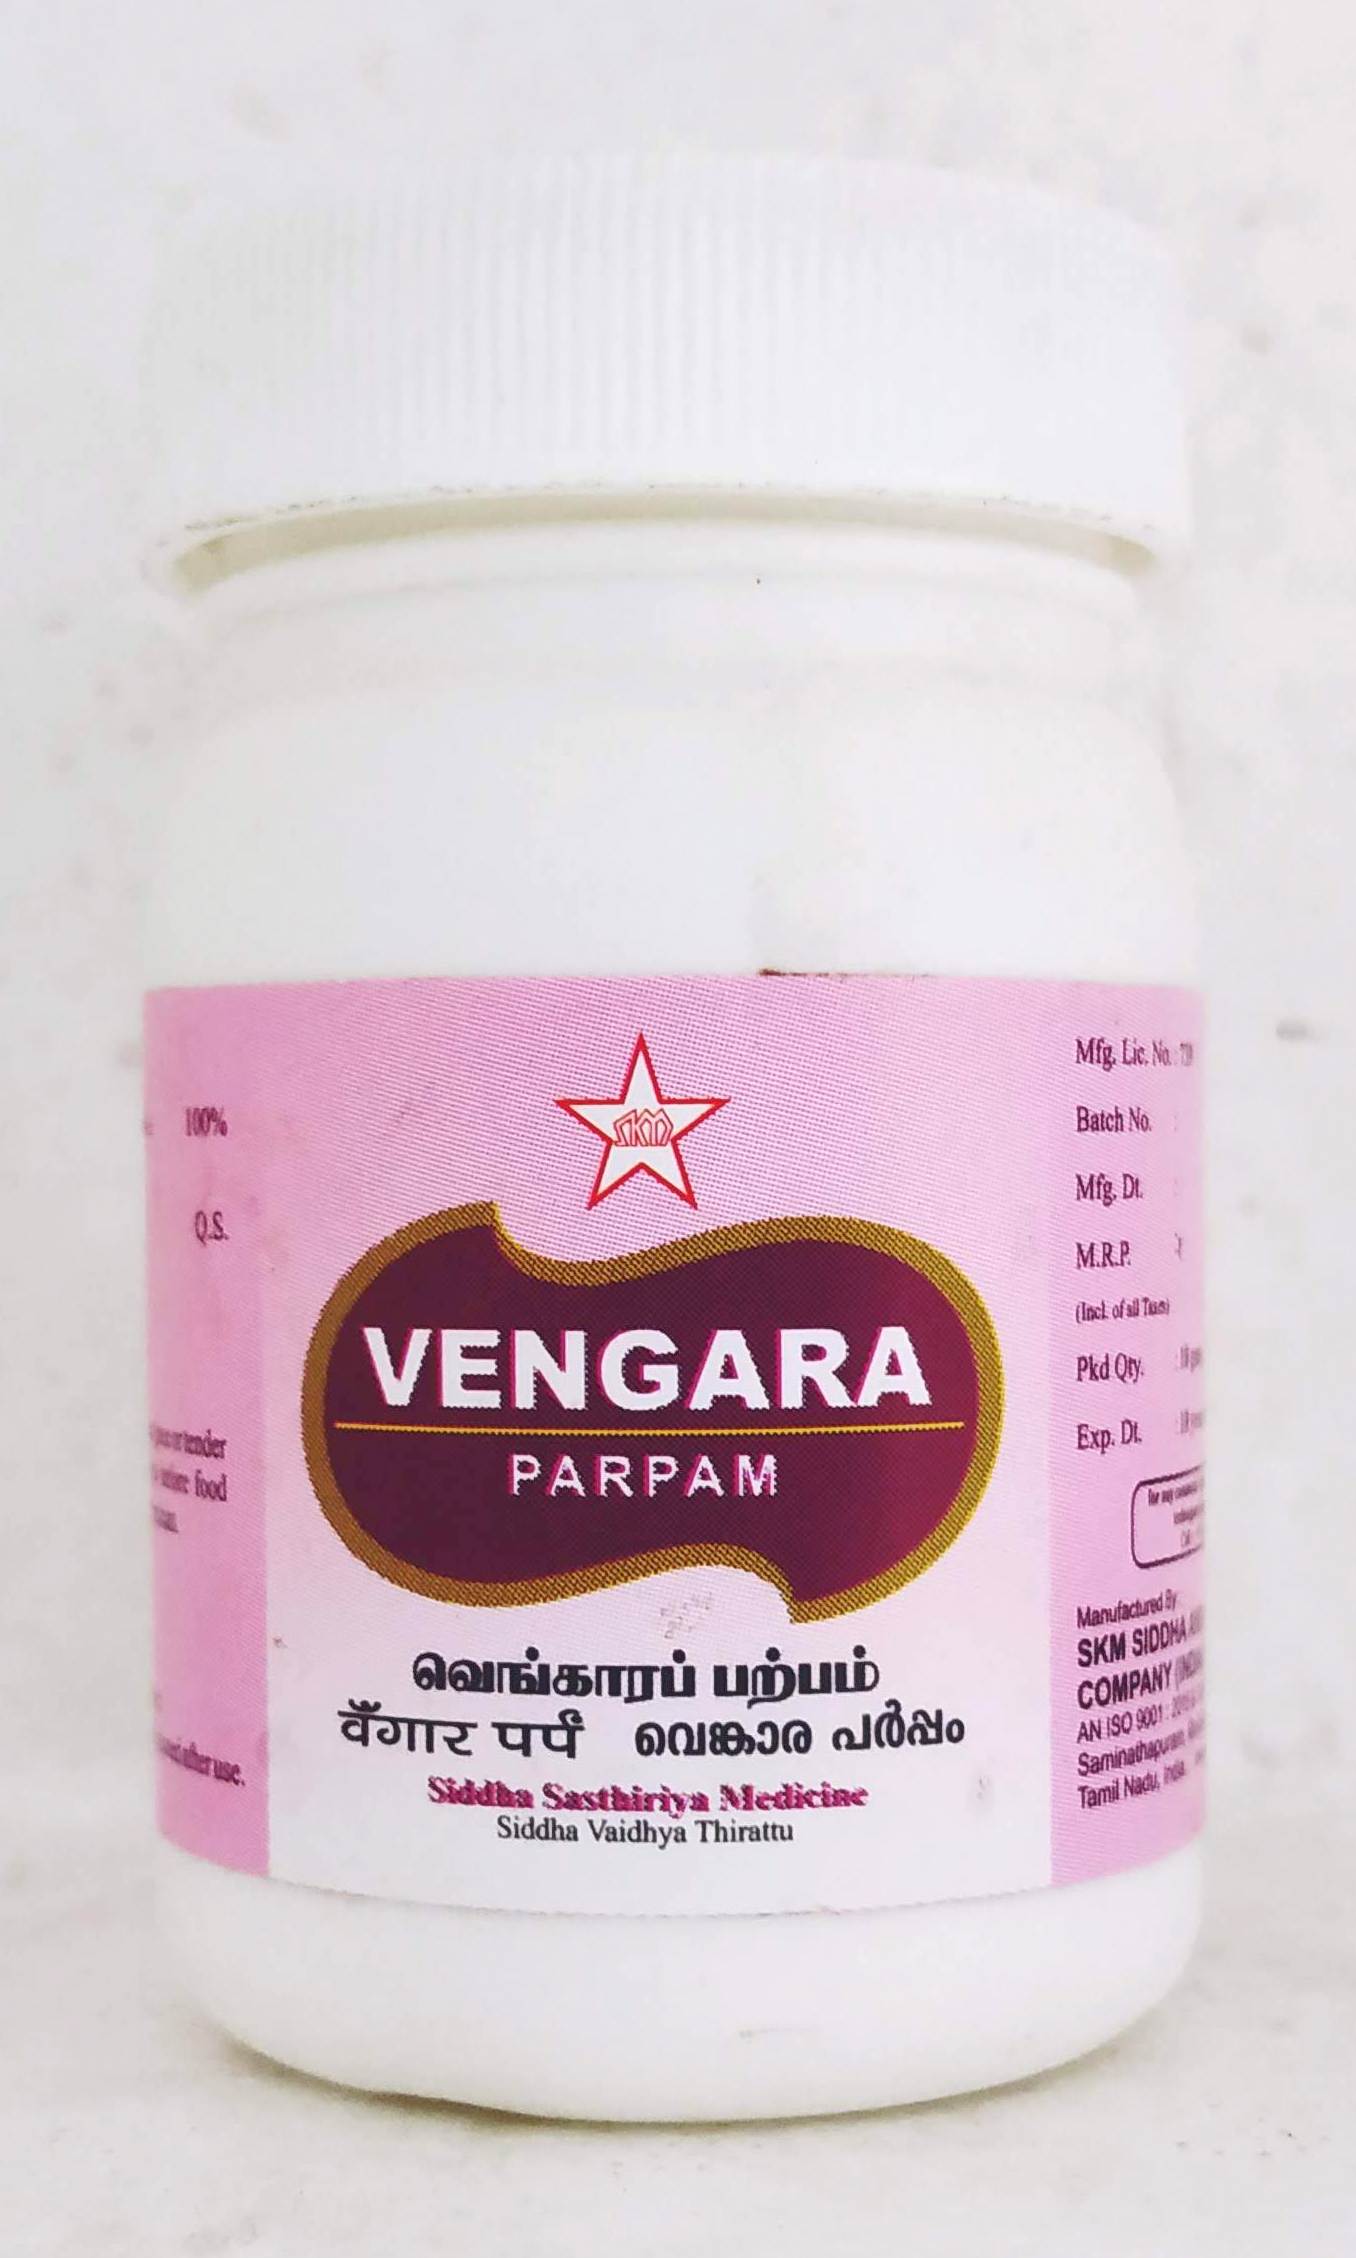 Shop Vengara Parpam 10gm at price 70.00 from SKM Online - Ayush Care